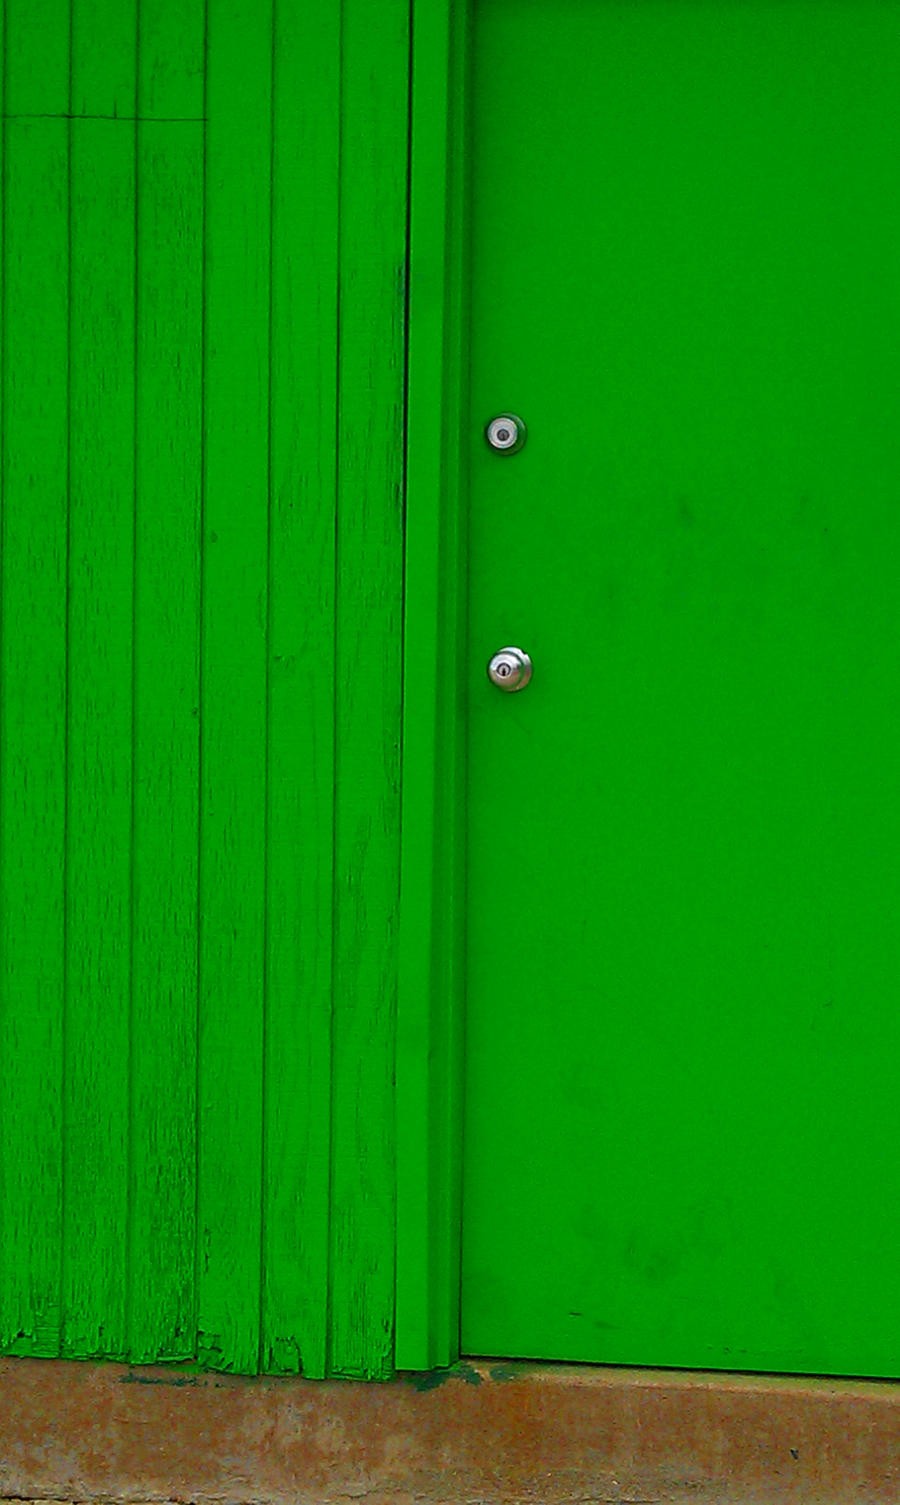 the_green_door_by_colynsfotografs-d4a7nwd.jpg